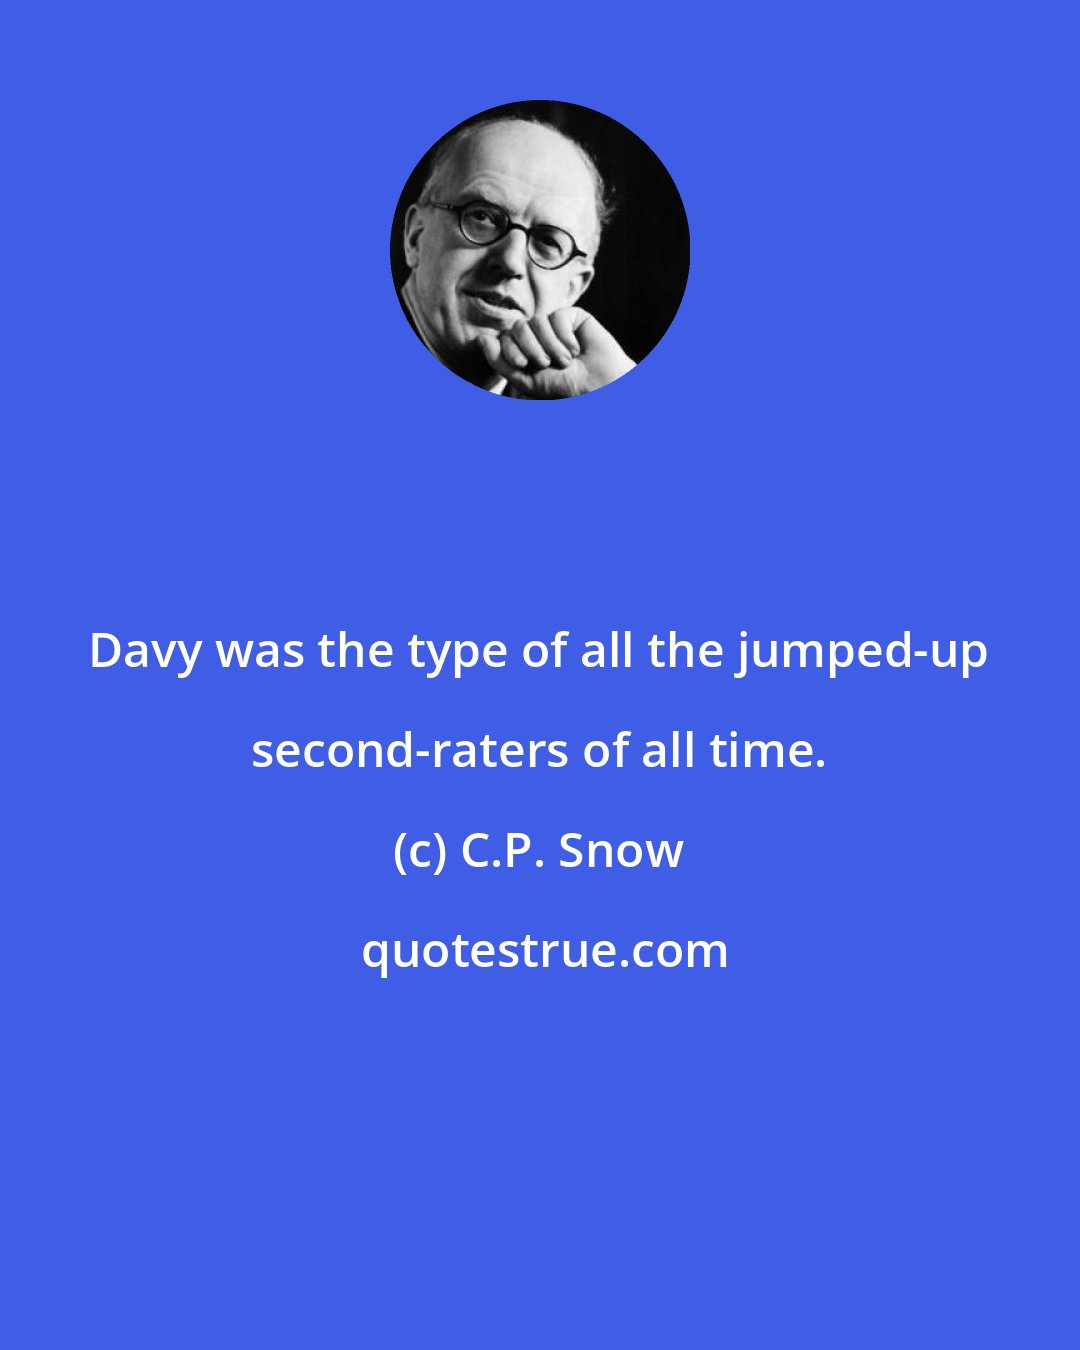 C.P. Snow: Davy was the type of all the jumped-up second-raters of all time.